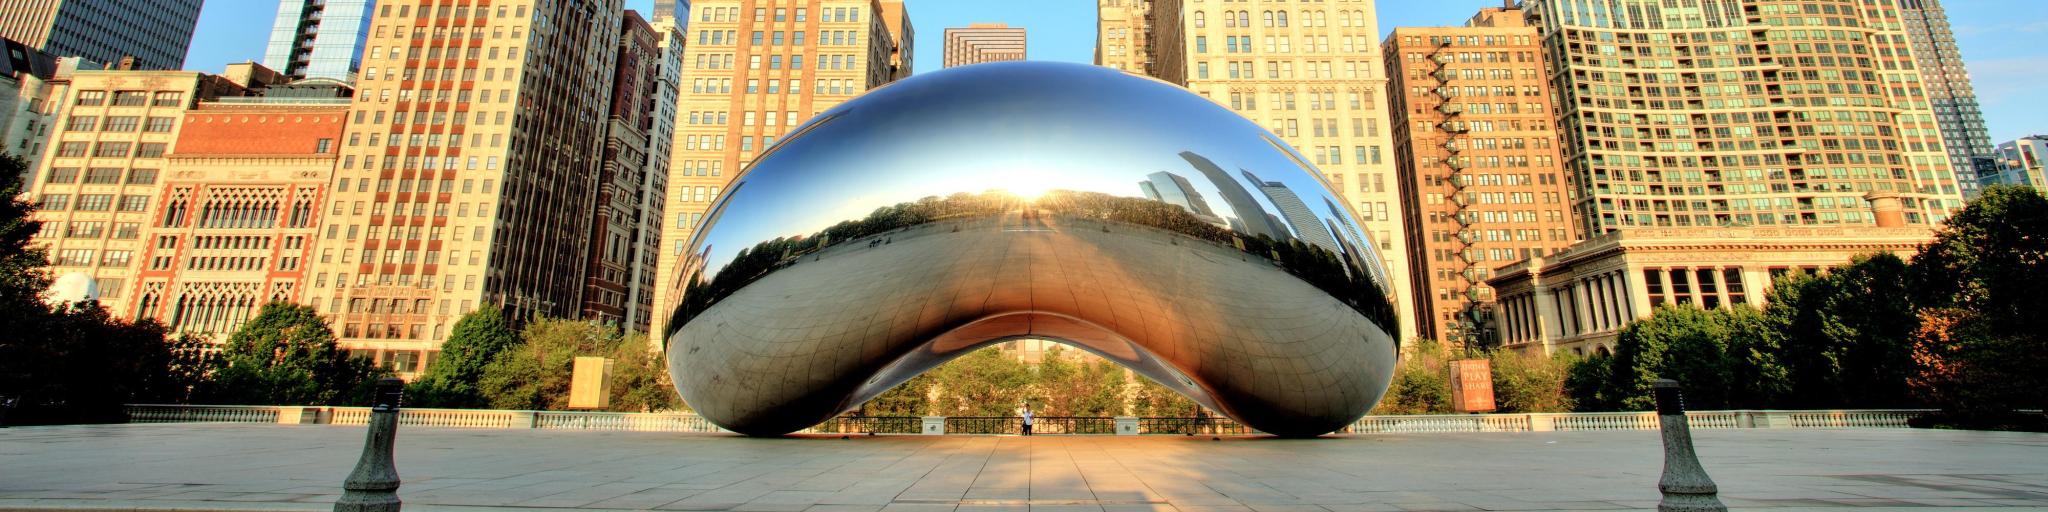 View of the famous metal sculpture in Chicago with tall buildings in the background with blue sky